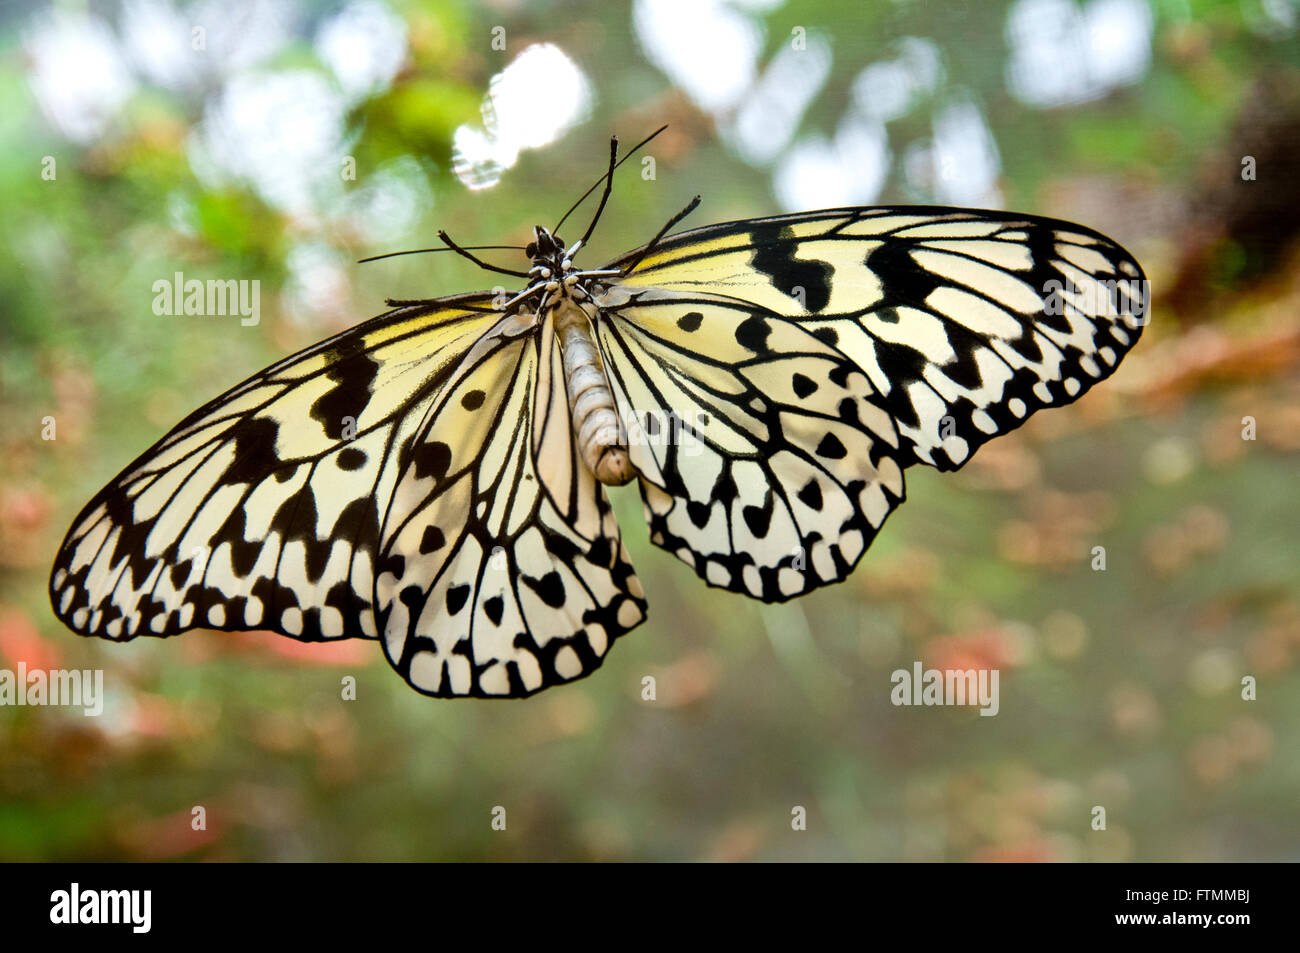 Idea leuconoe butterfly white tree nymph, paper kite, rice paper tropical, with wings spread in lush habitat Stock Photo